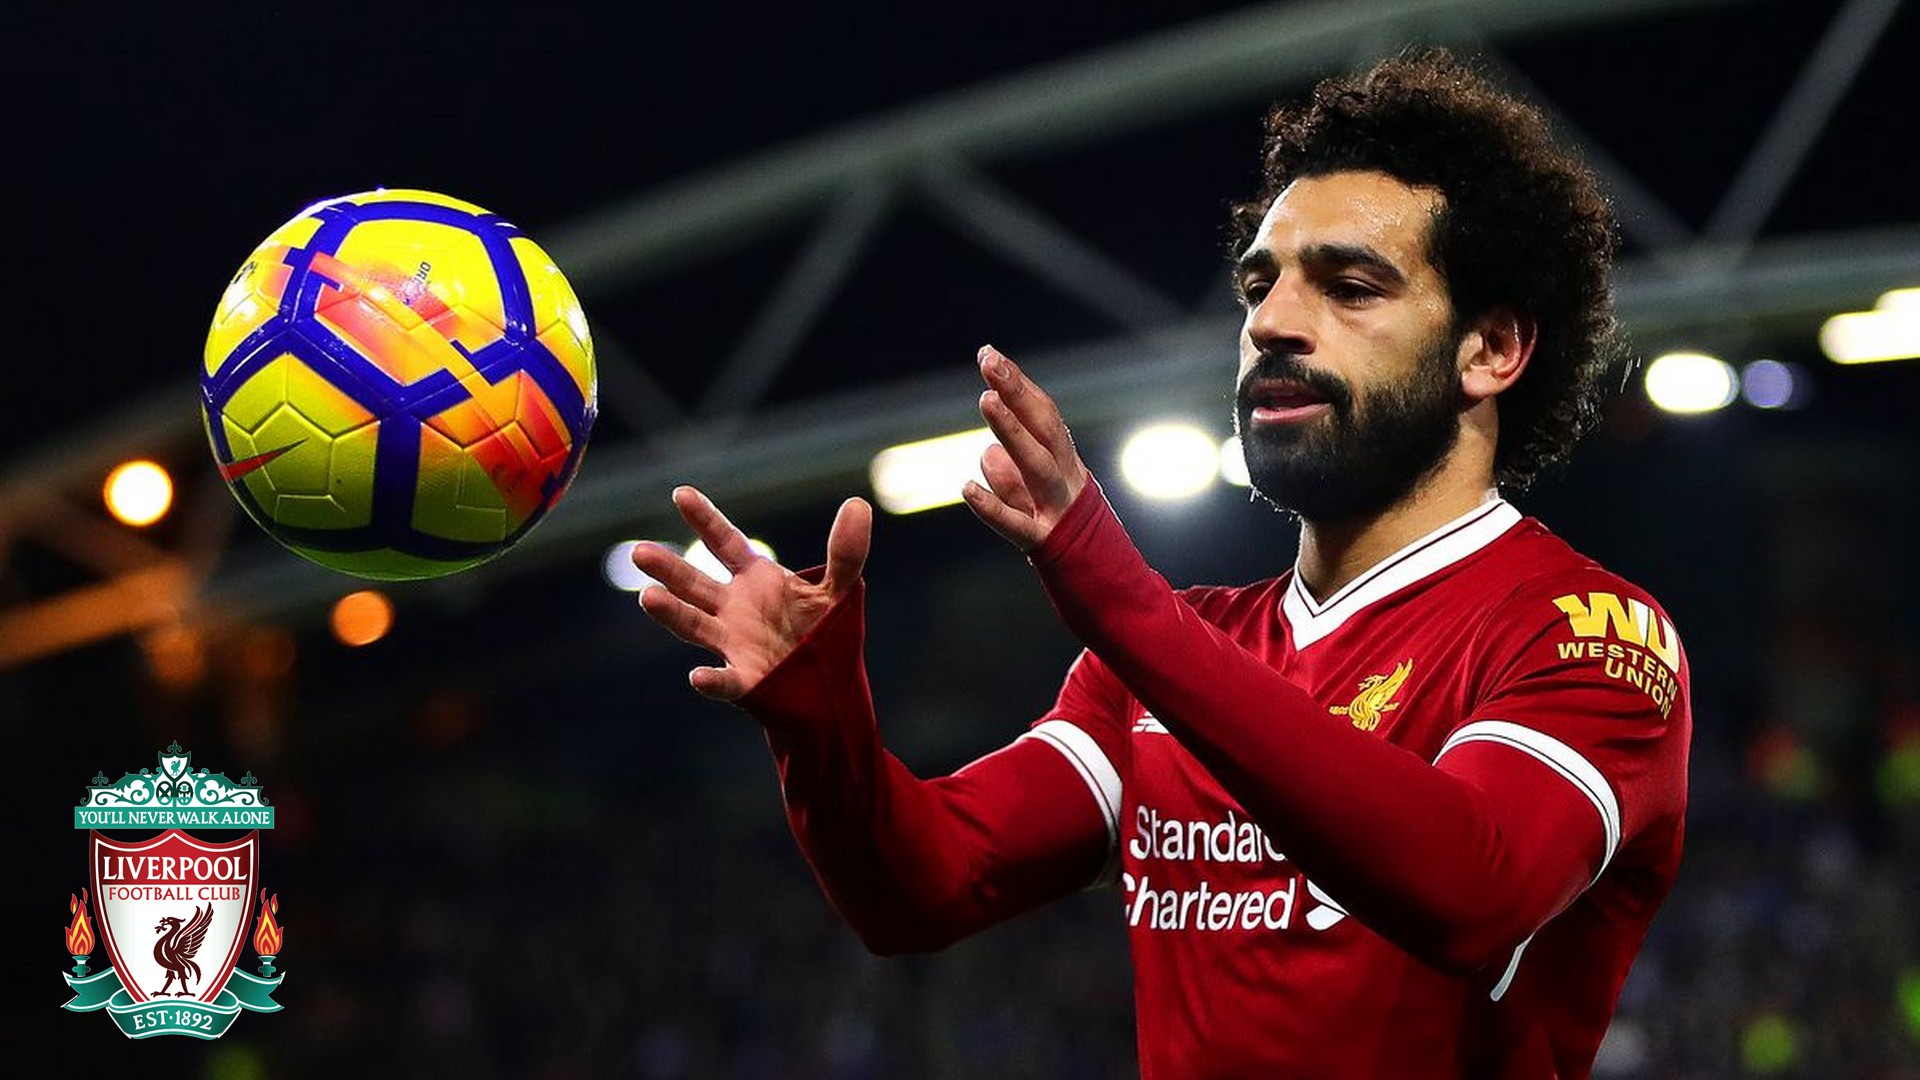 Mohamed Salah Liverpool HD Wallpaper with image resolution 1920x1080 pixel. You can make this wallpaper for your Desktop Computer Backgrounds, Mac Wallpapers, Android Lock screen or iPhone Screensavers